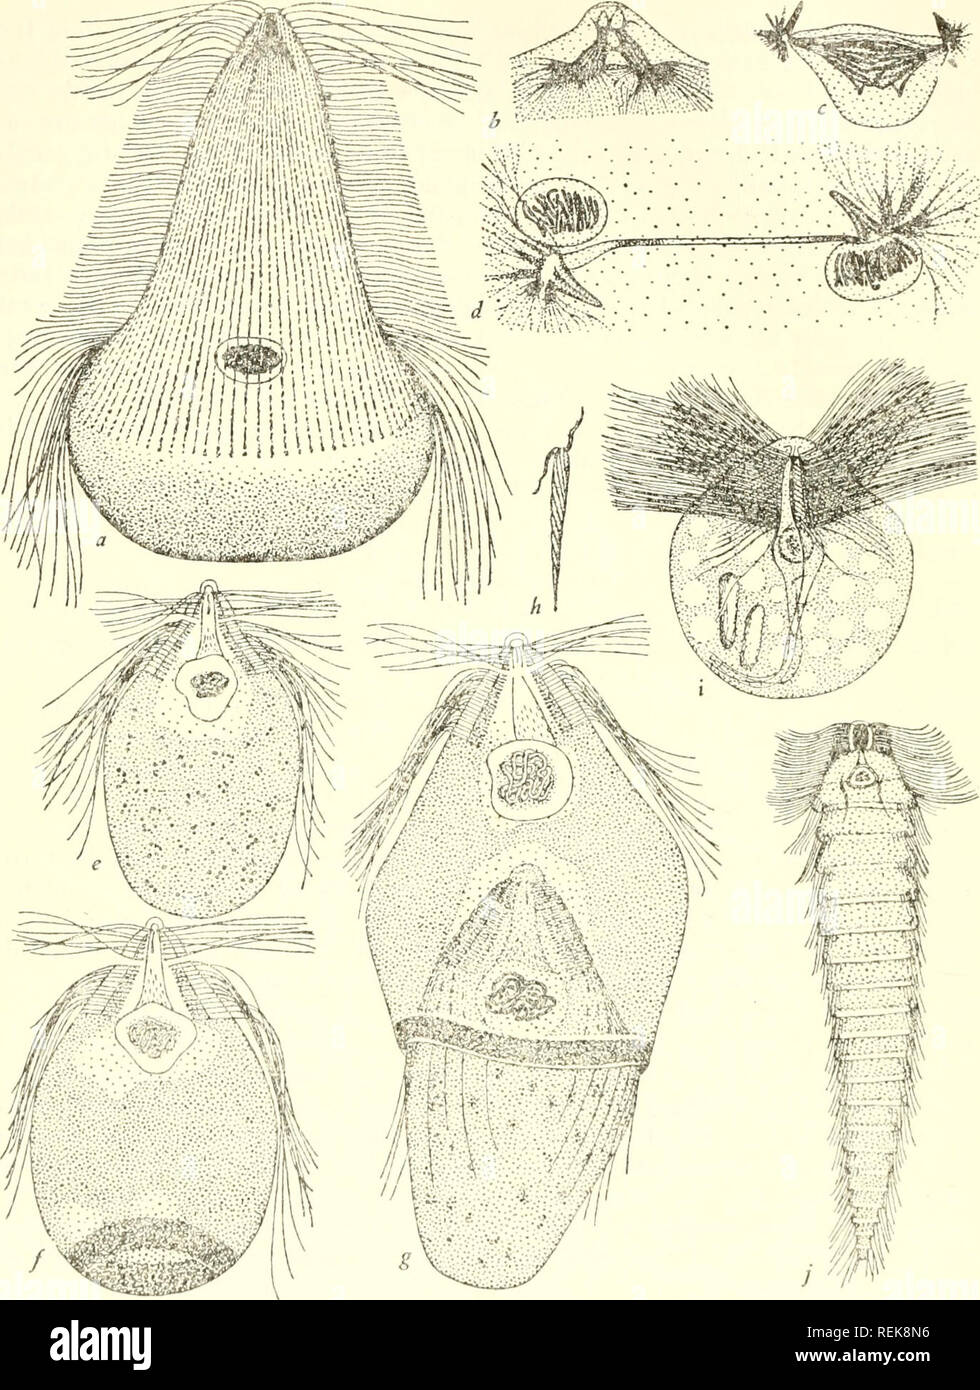 . The classification of lower organisms. Biology. 170] The Classification of Lower Organisms. Fig. 32.—Hypermastigina : a-d, Trichonympha Campanula after Kofoid &amp; Swezy (1919); a, cell x 250; b, division of centroblcpharoplast and formation of paradesmose, and c and d, earlier and later stages of mitosis x 500. e, f, g, Sperm, egg, and fertilization of Trichonympha sp. from the roach Cryptocercus after Cleve- land (1948). h, Hoplonympha Natator x 250 after Light (1926). i, Staurojoenina assimilis x 250 after Kirby (1926). j, Tcratonympha mirabilis after Koidzumi (1921).. Please note that t Stock Photo